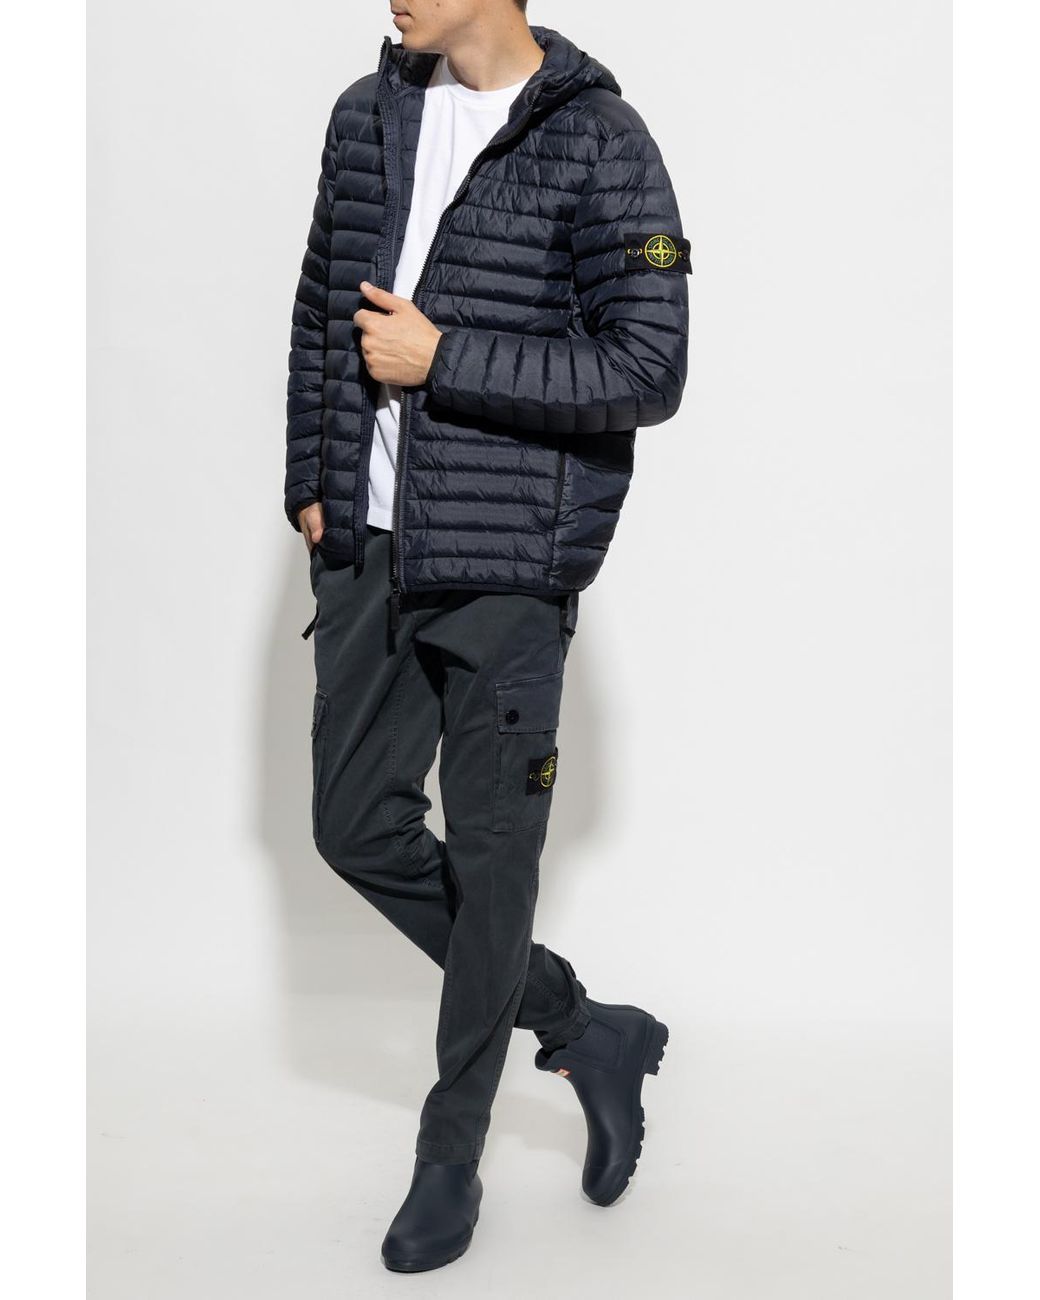 Stone Island Down Jacket in Navy Blue (Blue) for Men | Lyst